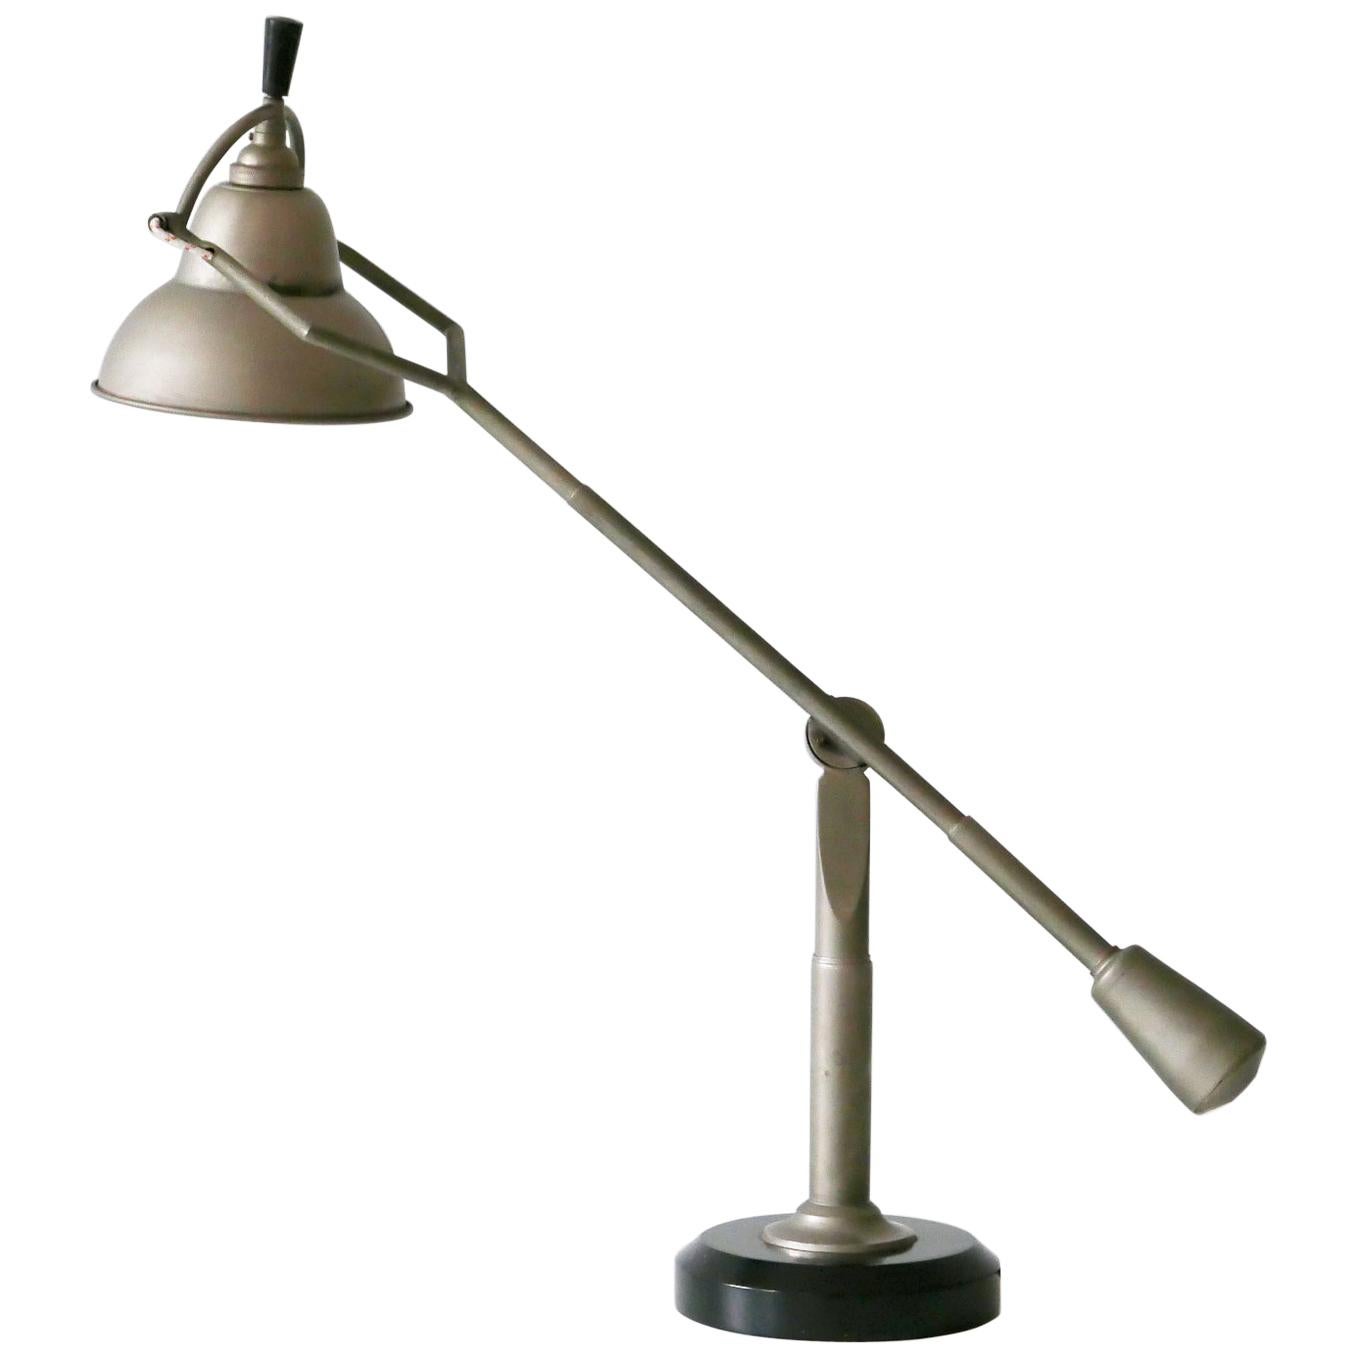 Modernist Counterbalance Table Lamp by Edouard-Wilfred Buquet, 1927, France